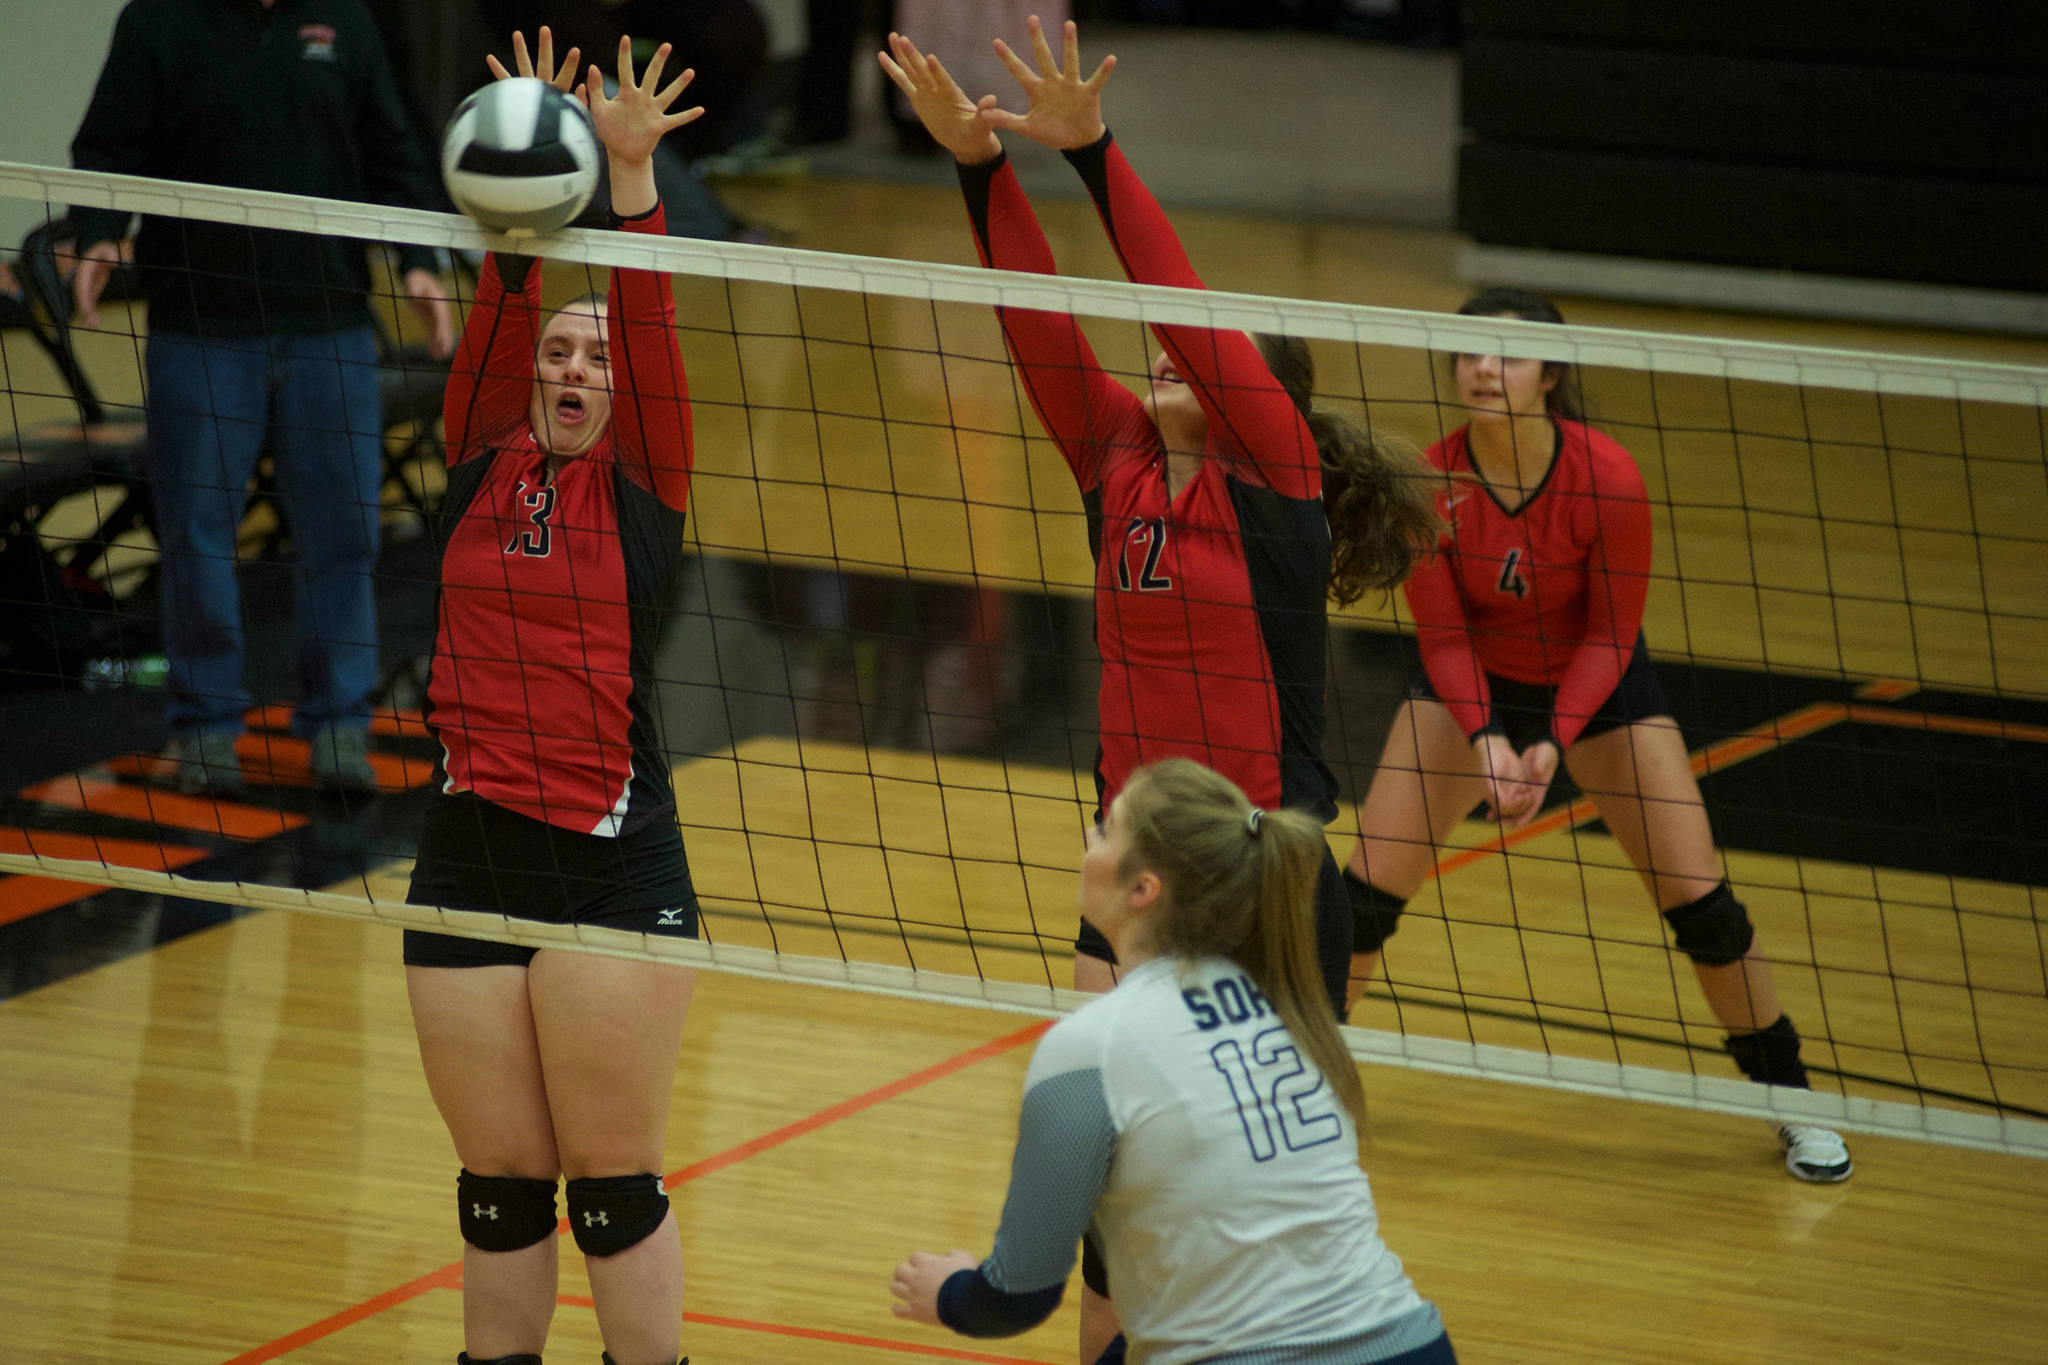 City launches youth volleyball league